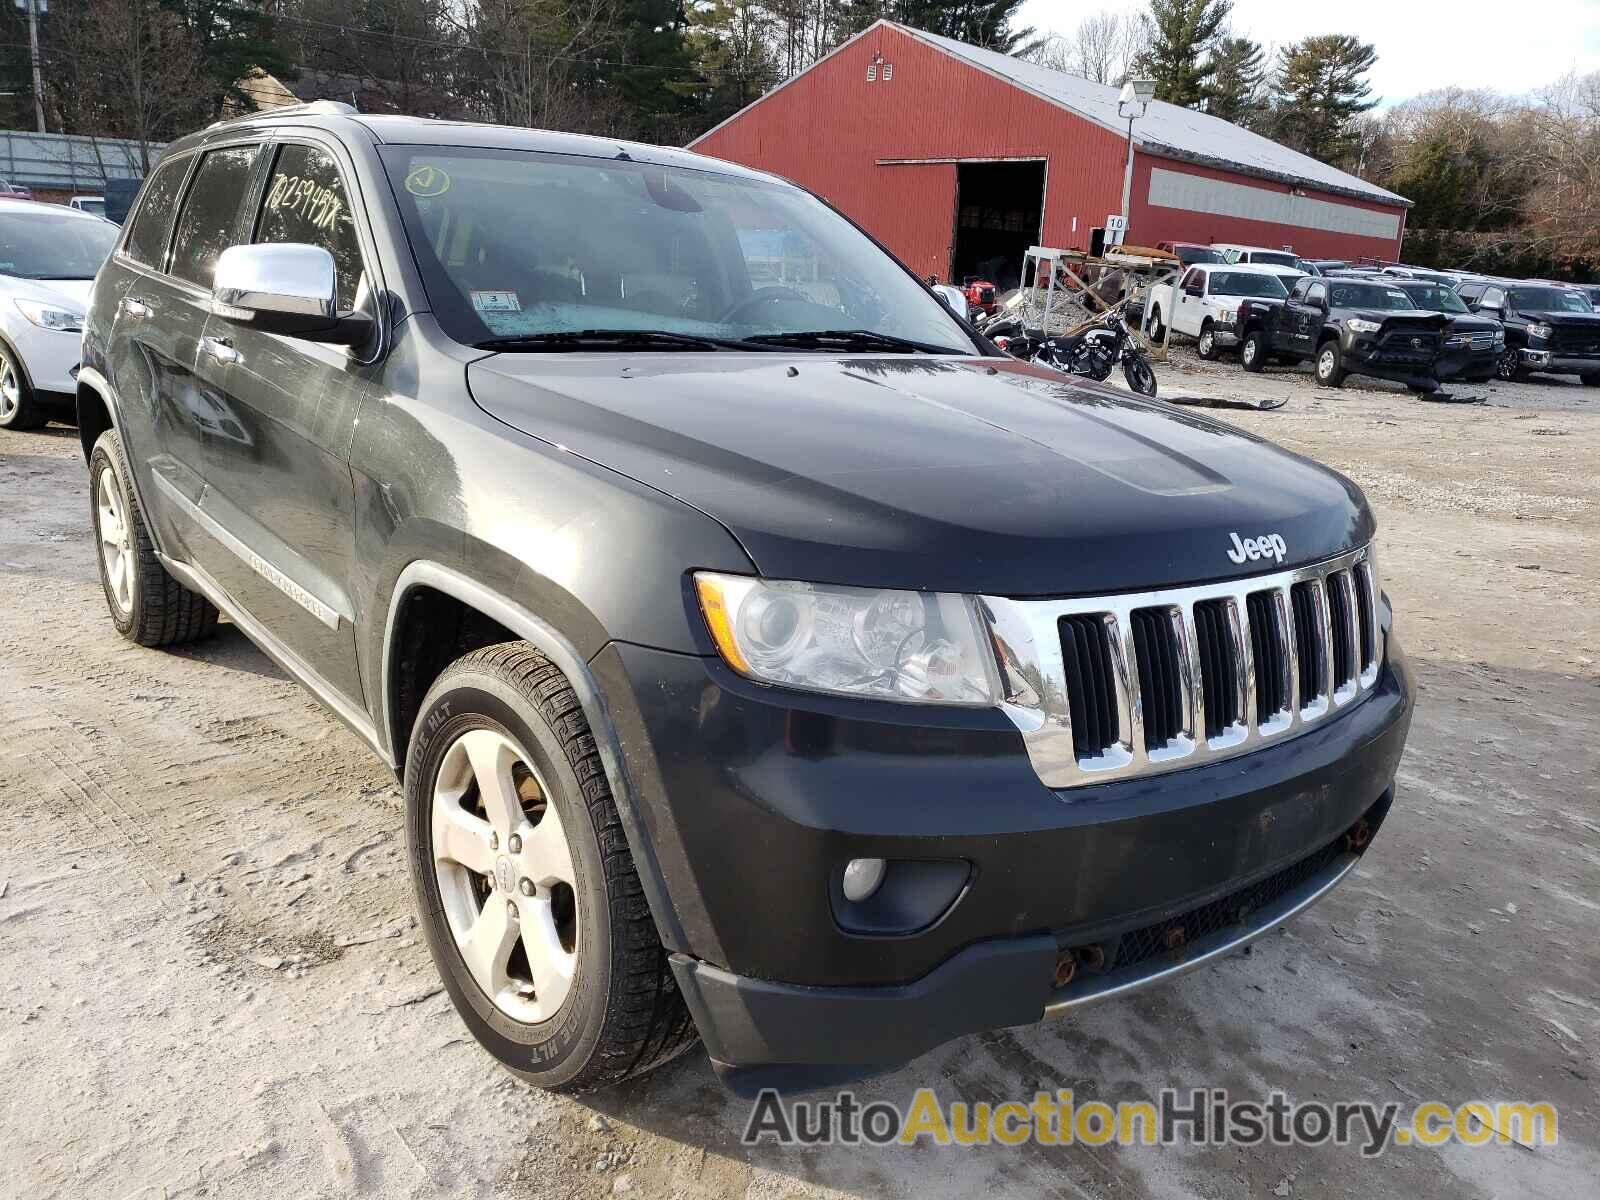 2011 JEEP CHEROKEE LIMITED, 1J4RR5GT9BC551940